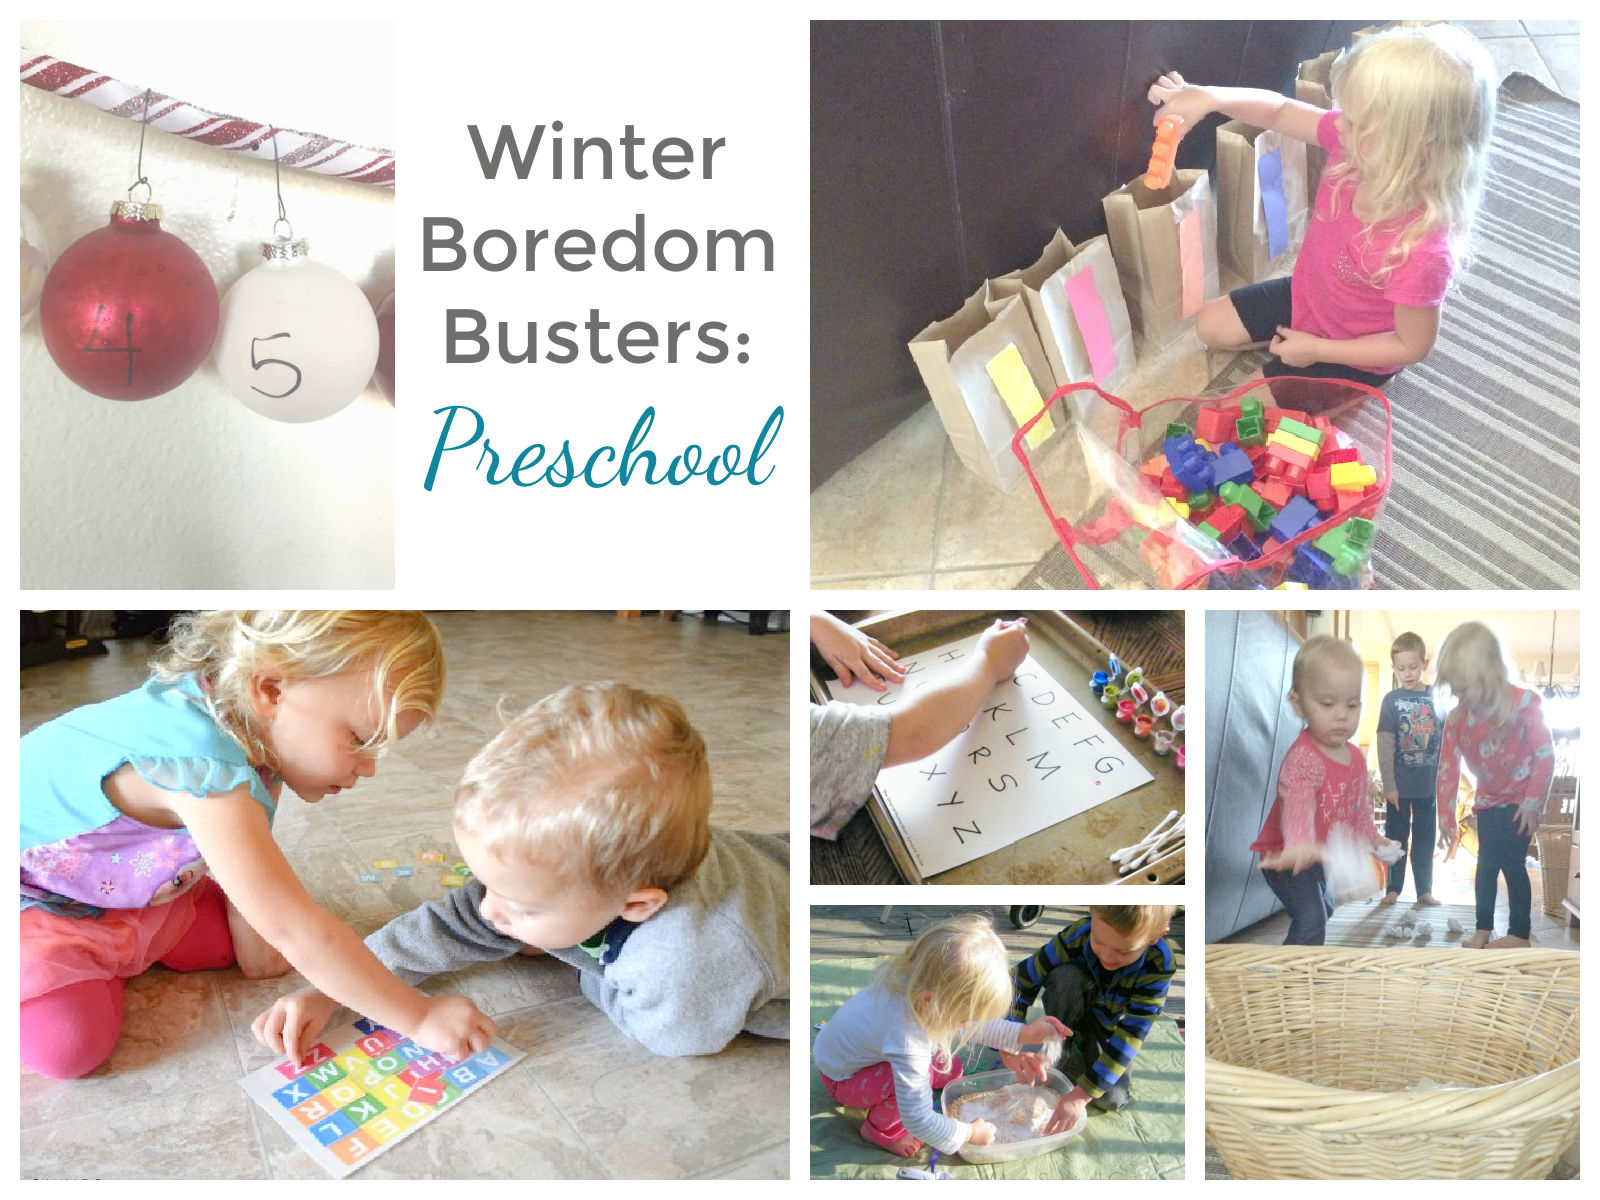 Winter boredom busters for preschool. This list of learning activities for preschool will help get through snow days at home or when the weather is too cold to play outside.